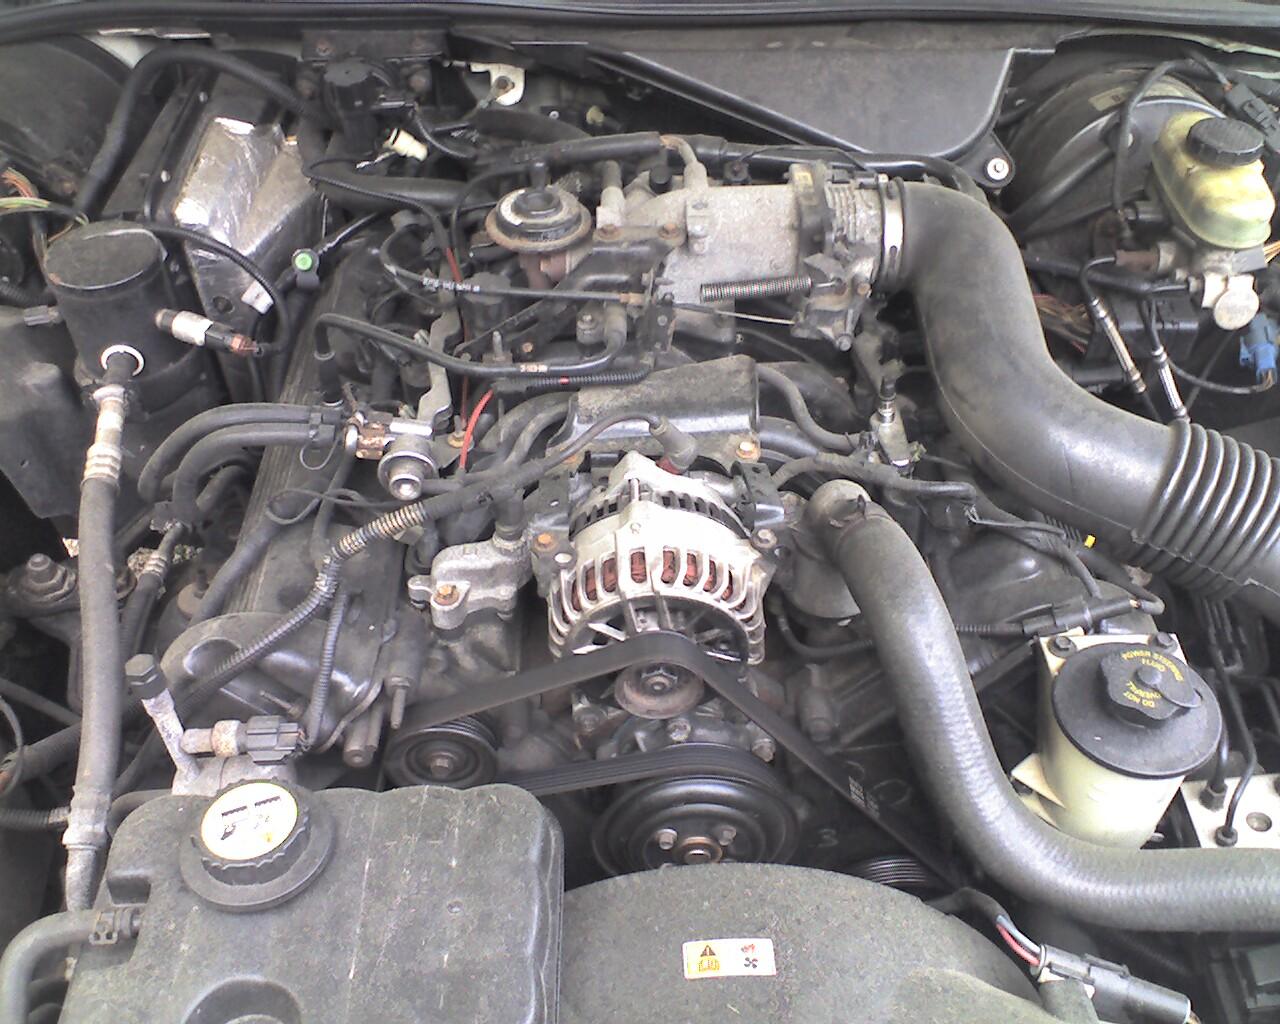 2002 Ford crown victoria engine specs #7